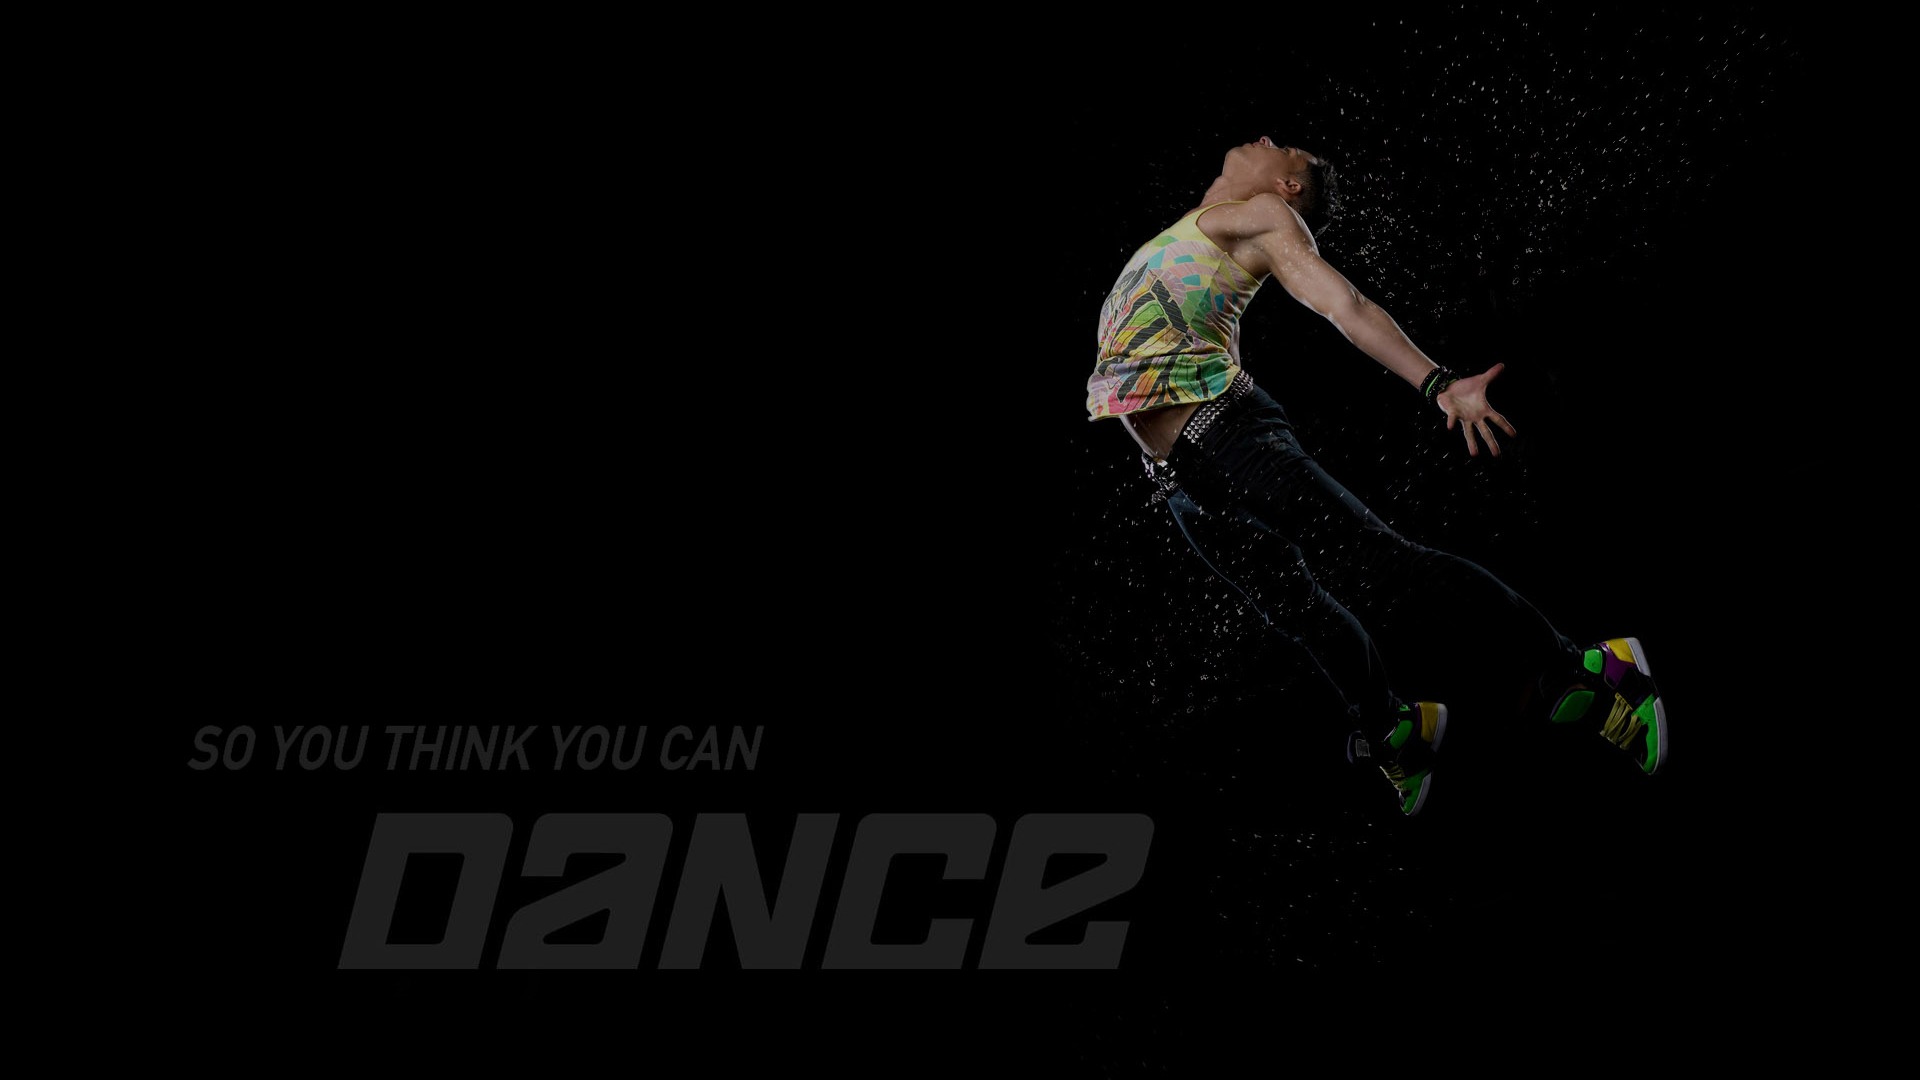 So You Think You Can Dance 舞林争霸 壁纸(二)6 - 1920x1080